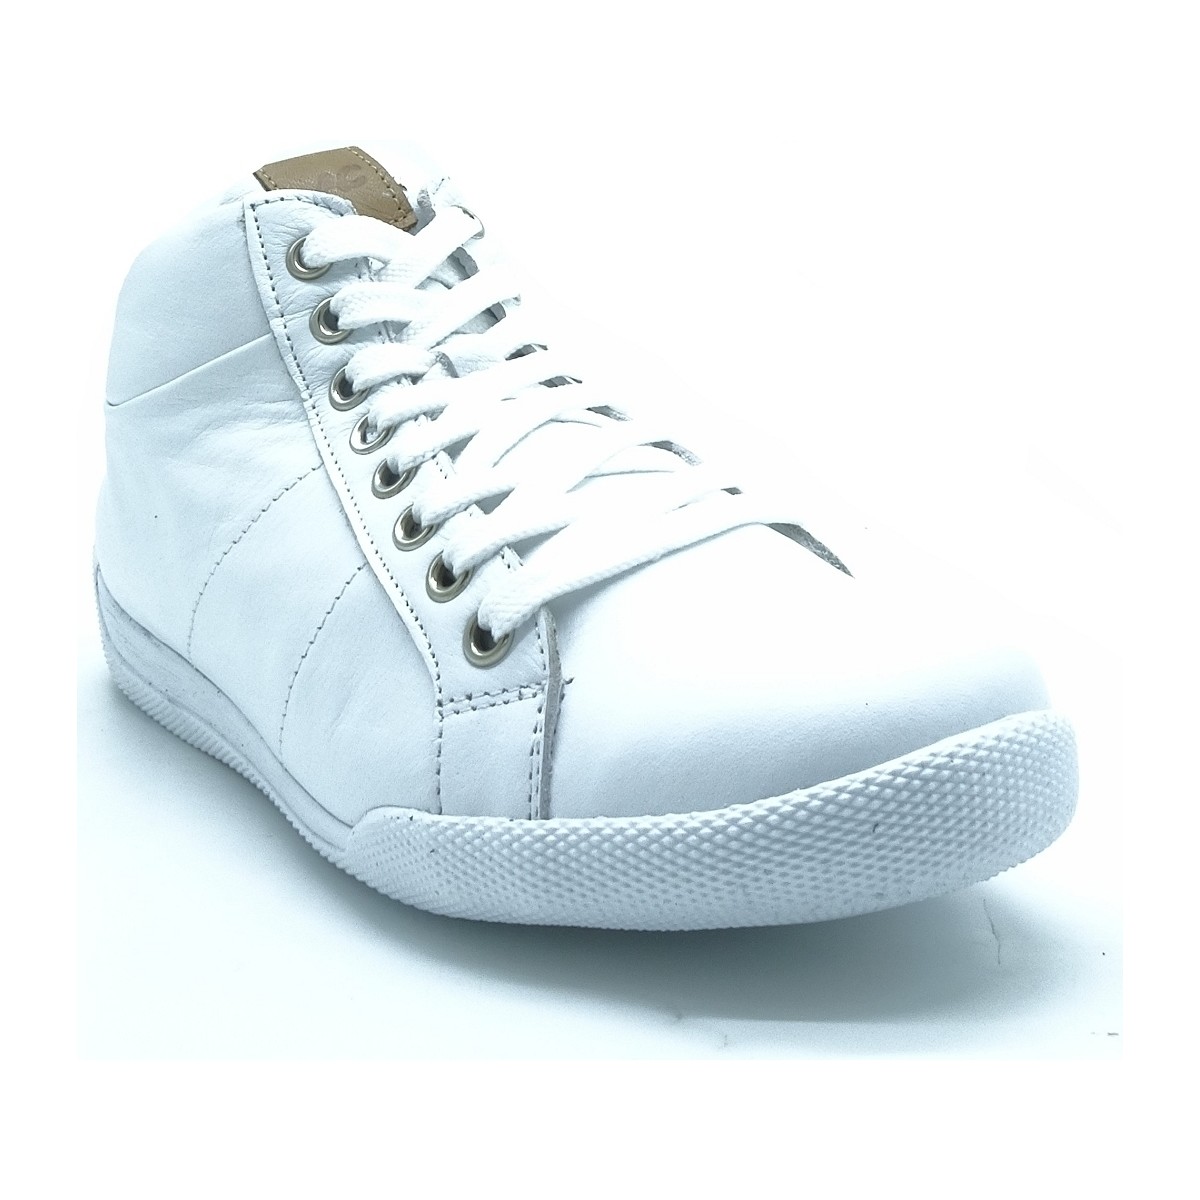 Chaussures Femme Baskets mode Andrea Conti 0343619 Blanc